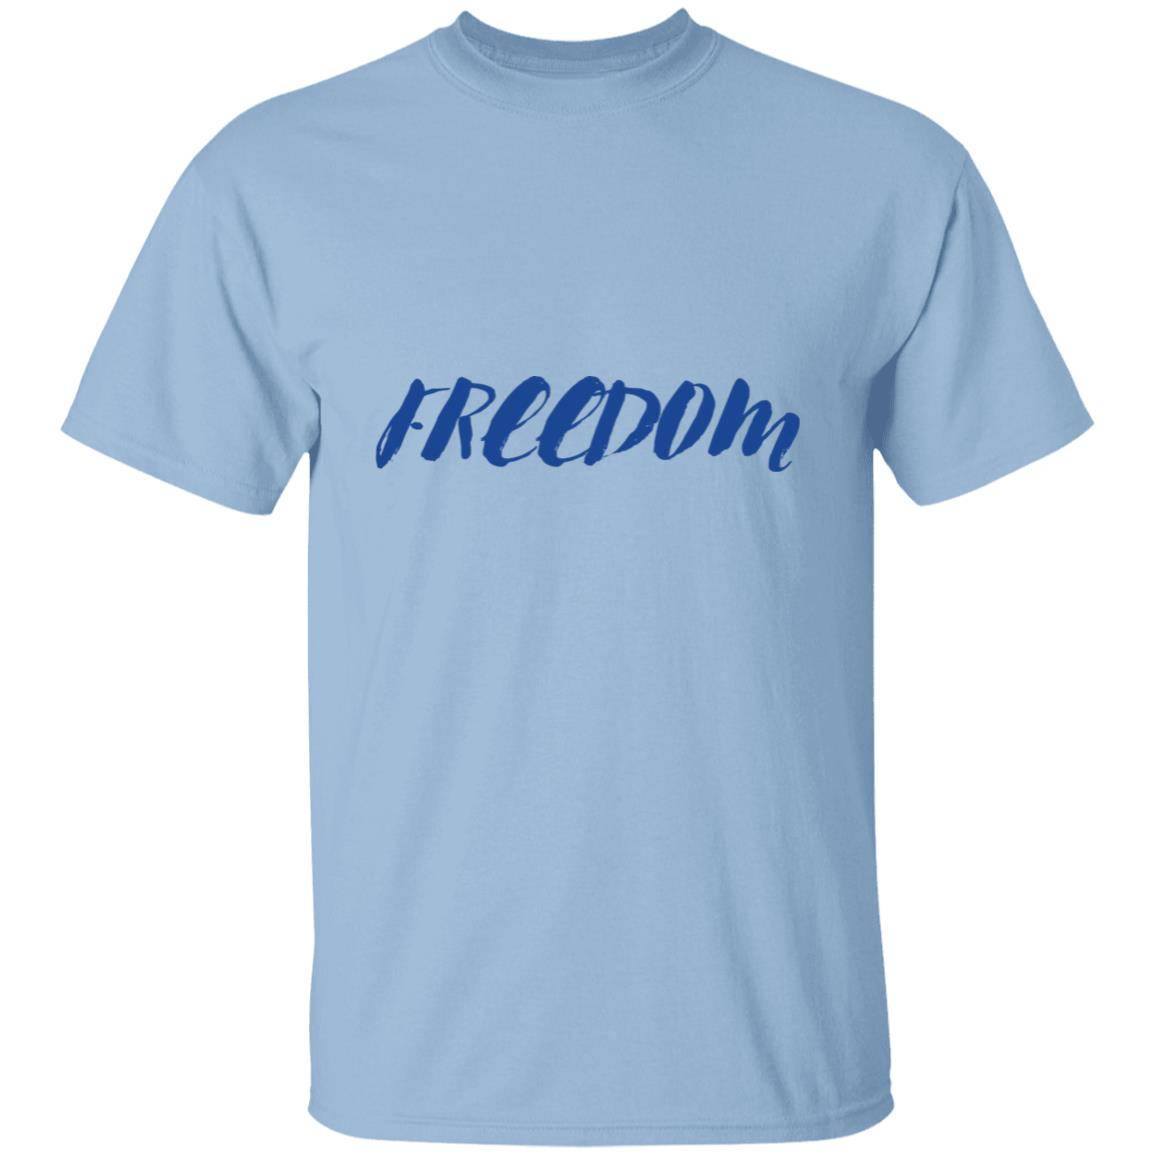 Light blue, heavyweight classic unisex t-shirt in 100% cotton. Freedom is written across the chest front.